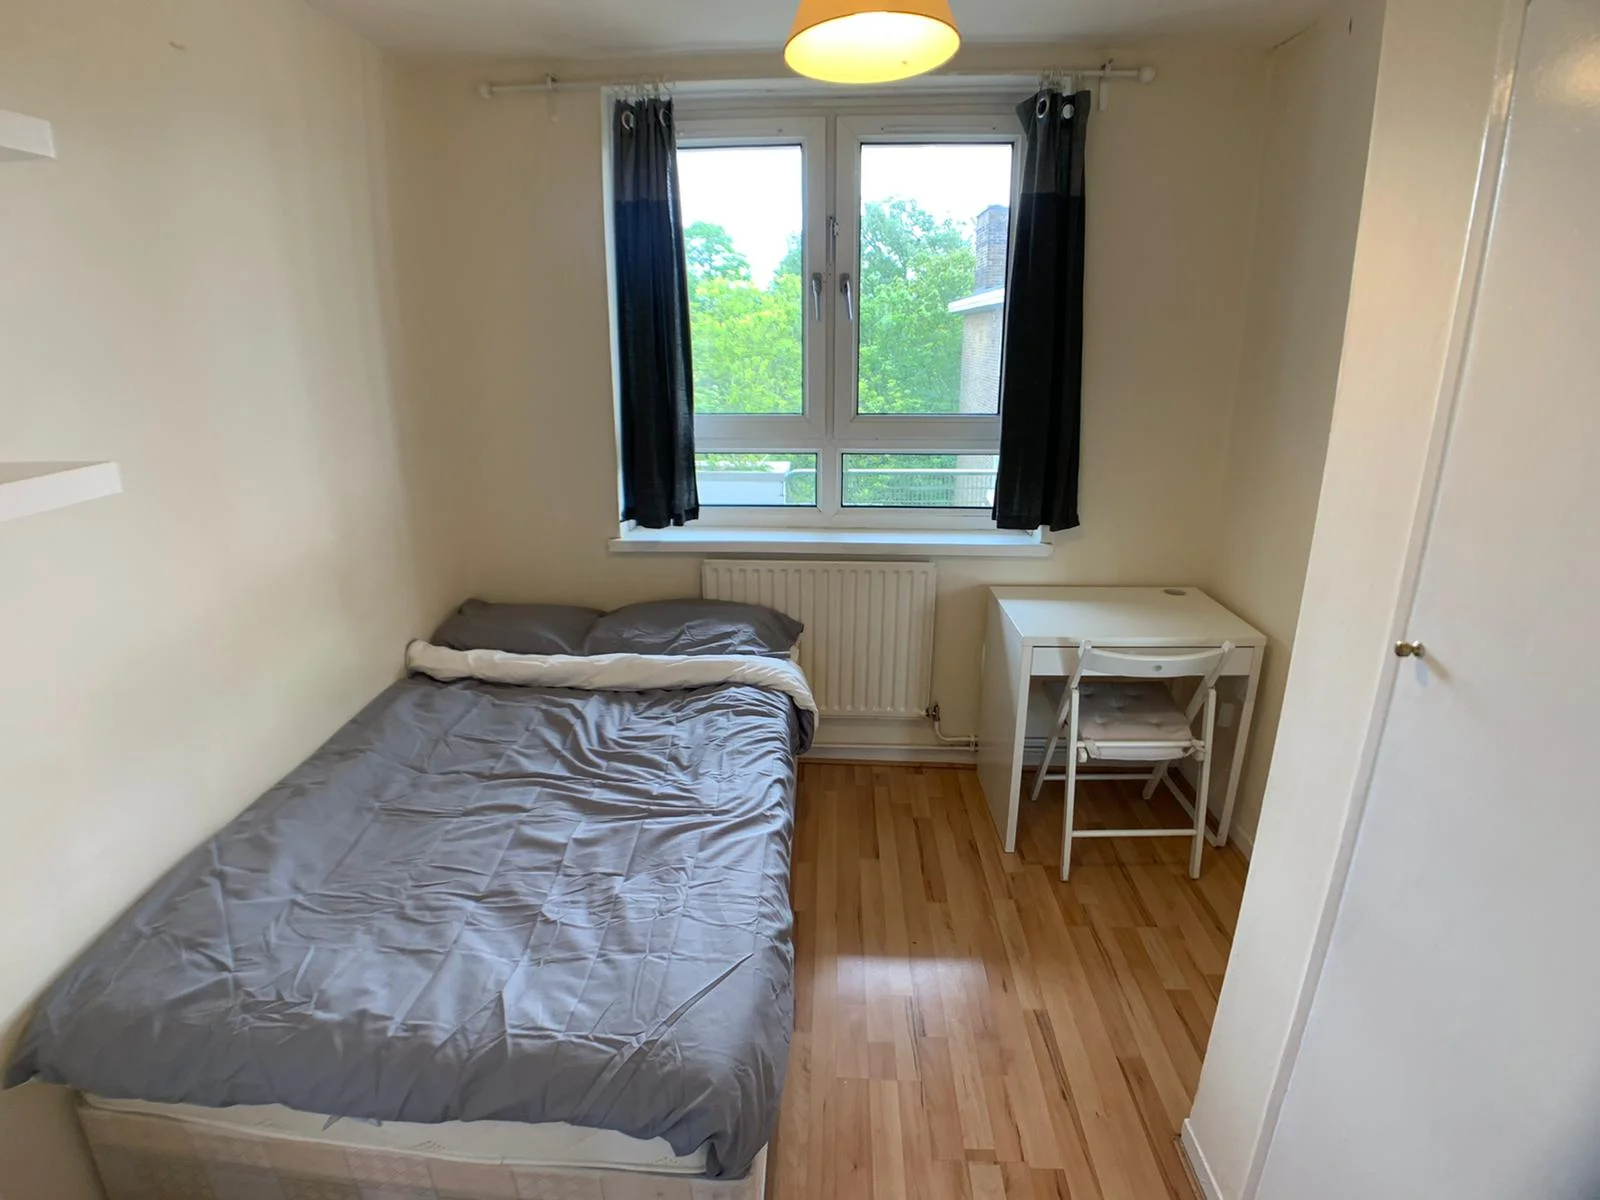 Four Bedroom Flat Located In Bethnal Green/Victoria Park